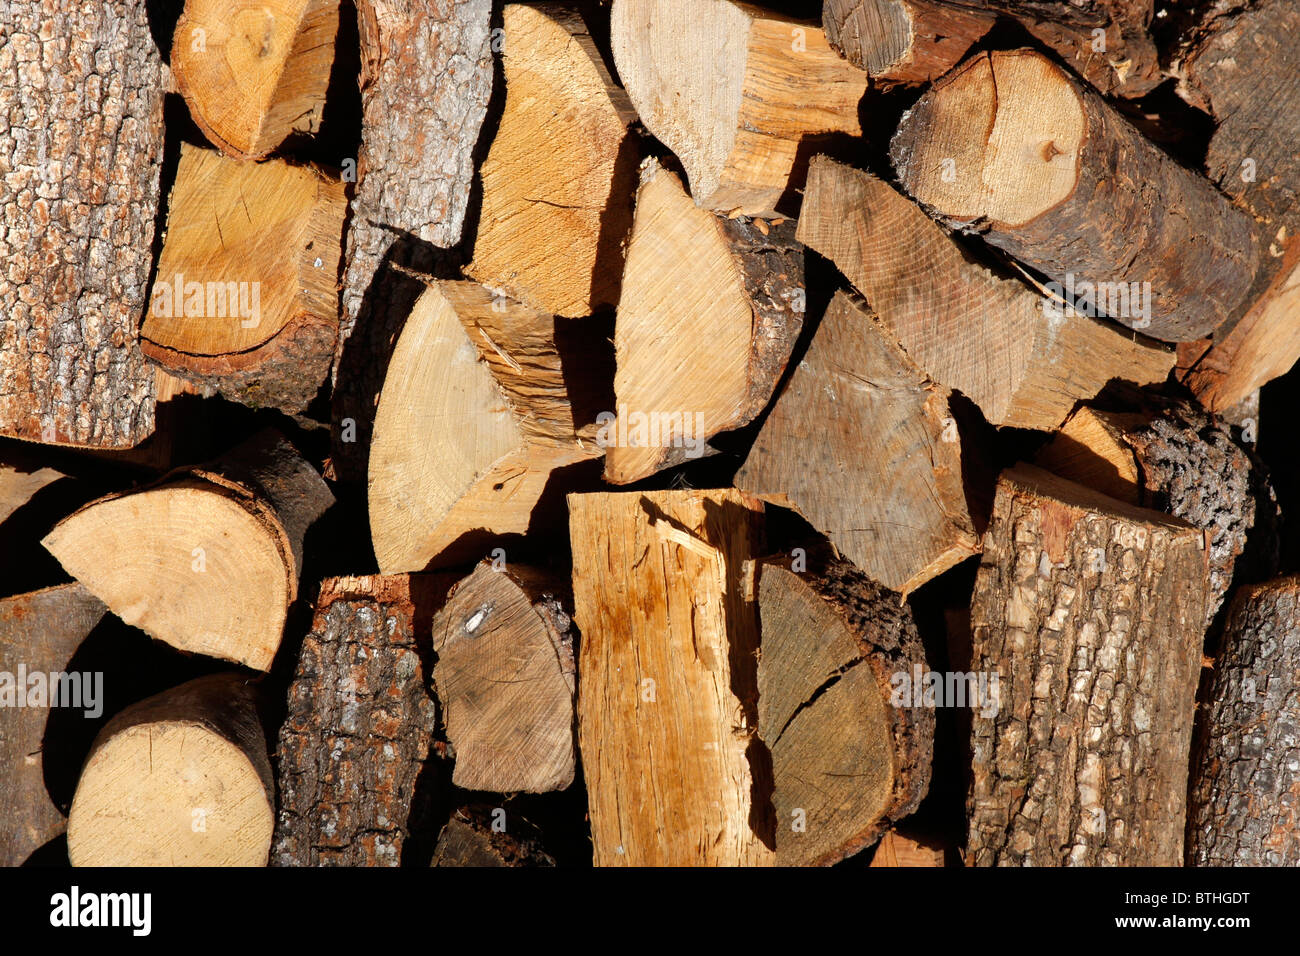 Wood pile stocked for winter in Le Marche,Italy. Stock Photo